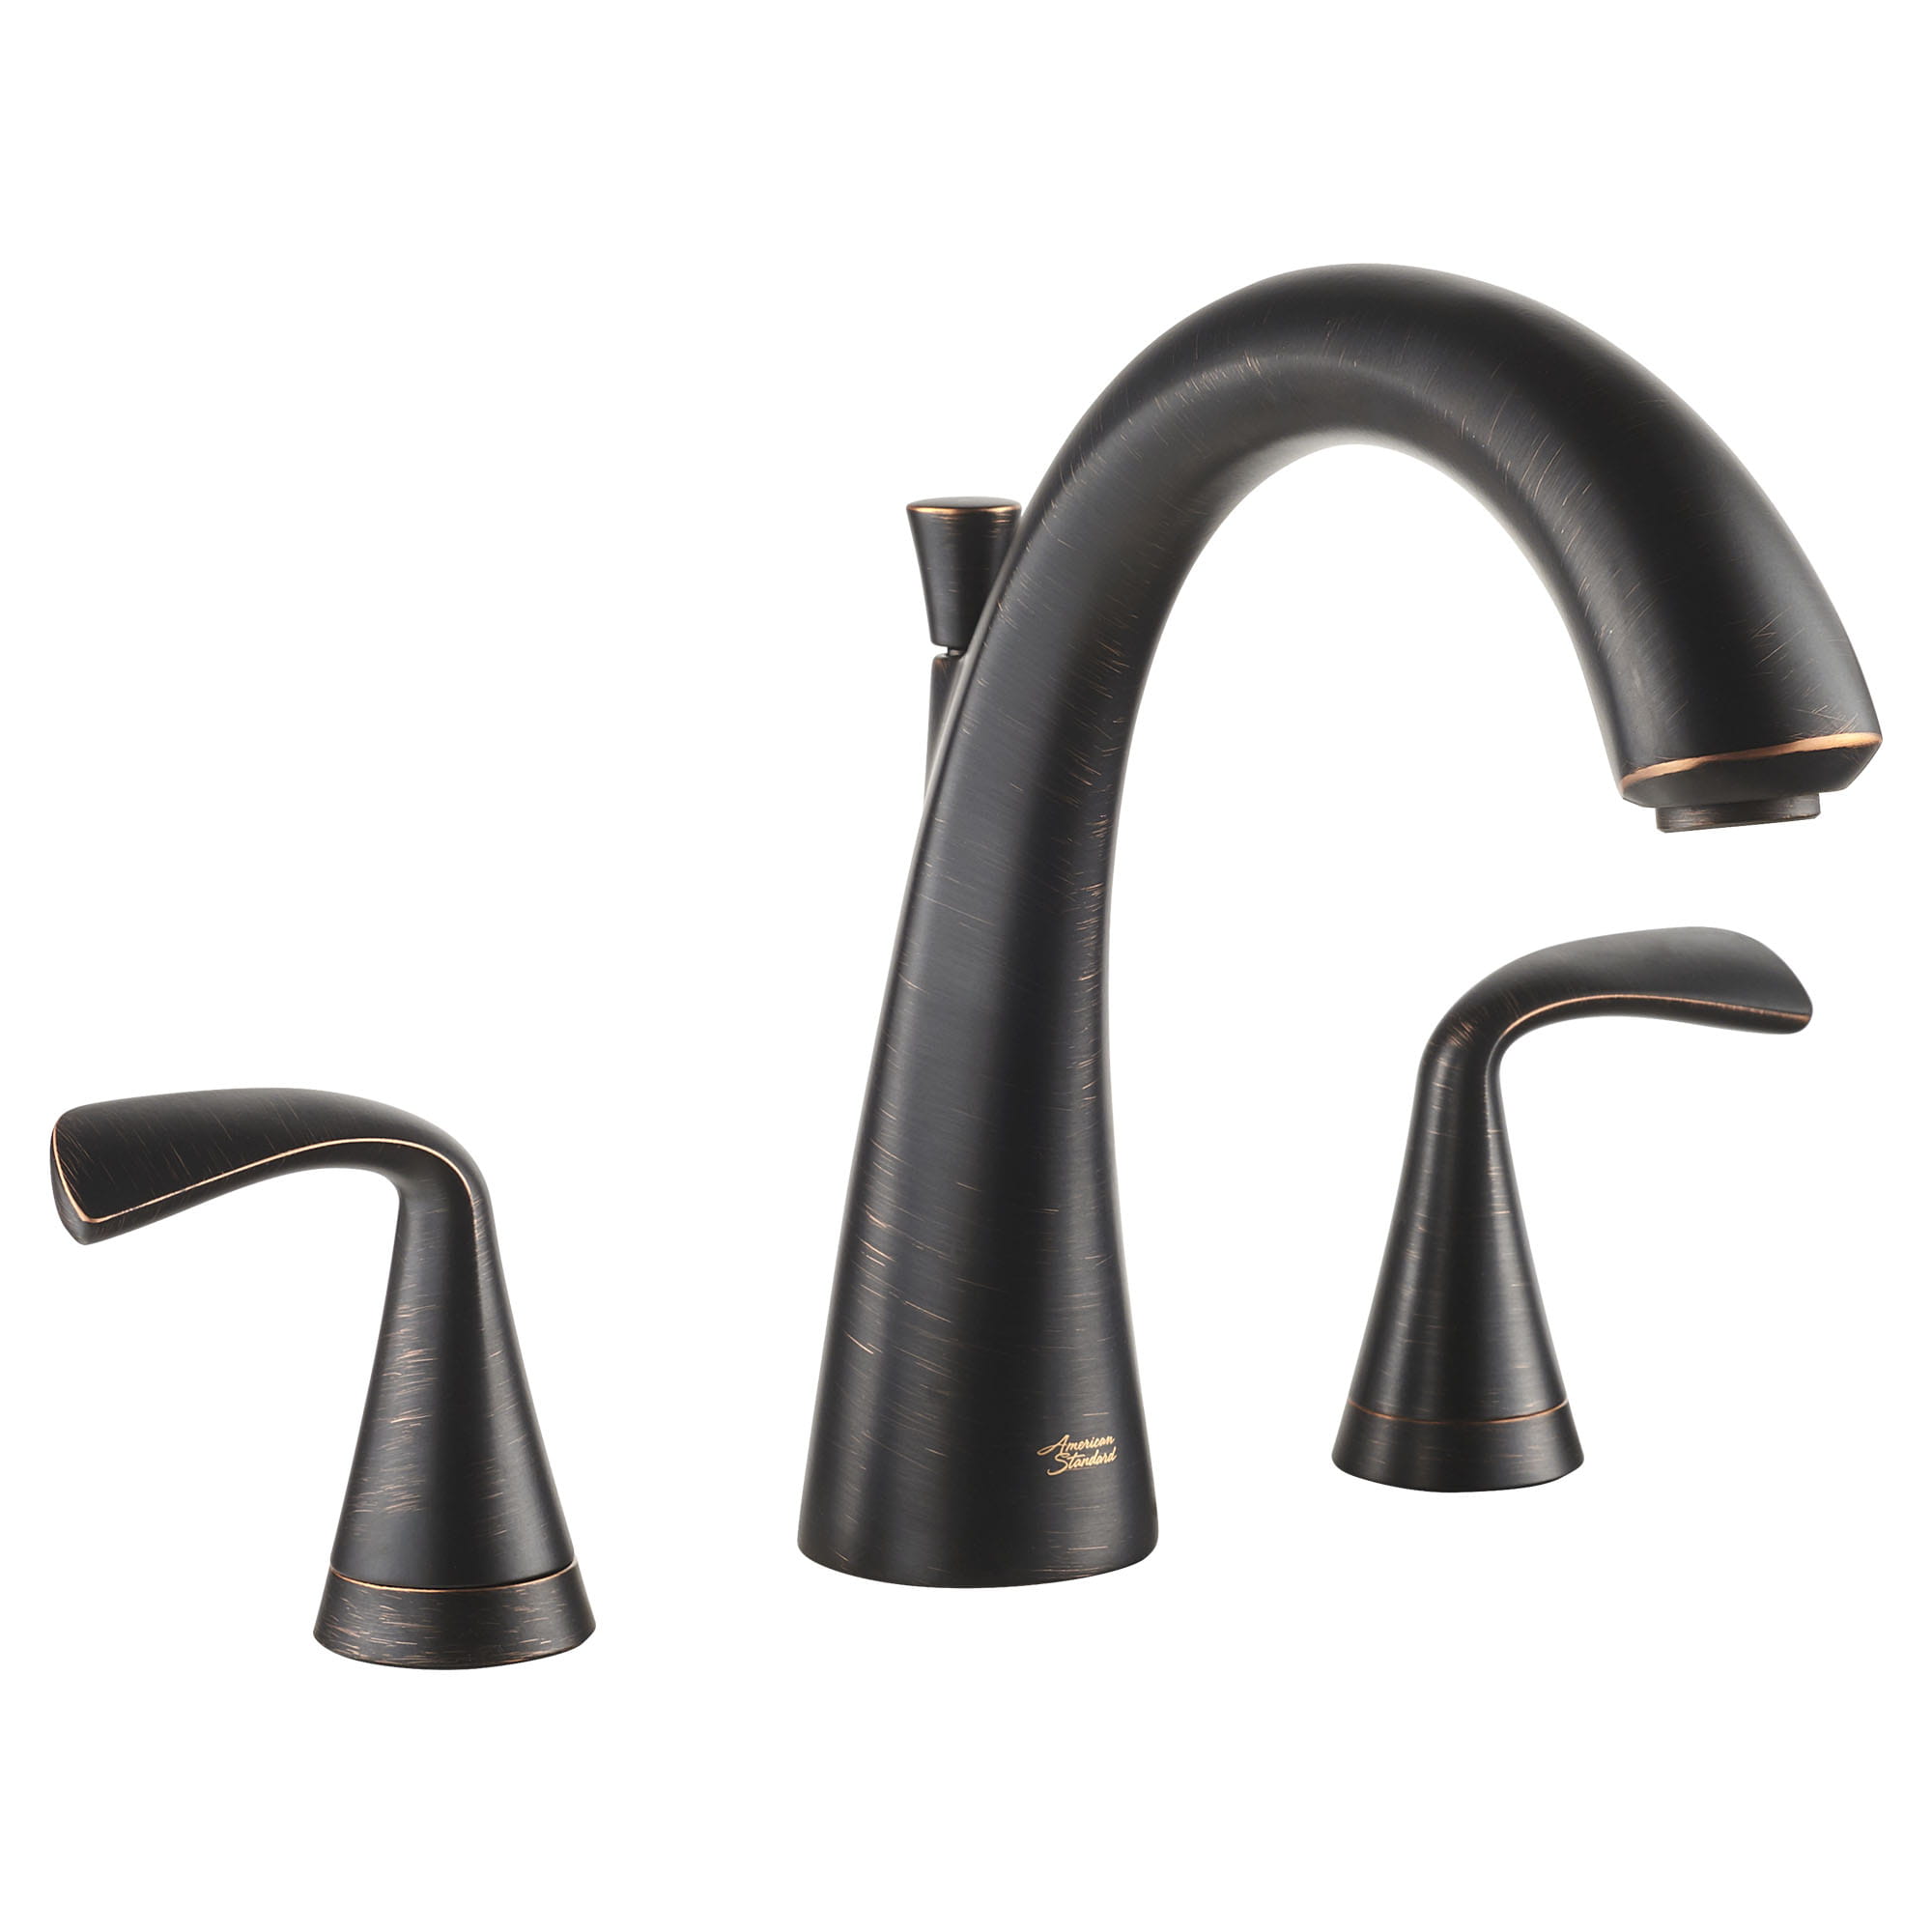 Fluent 8 Inch Widespread 2 Handle Bathroom Faucet 12 gpm 45 L min With Lever Handles LEGACY BRONZE